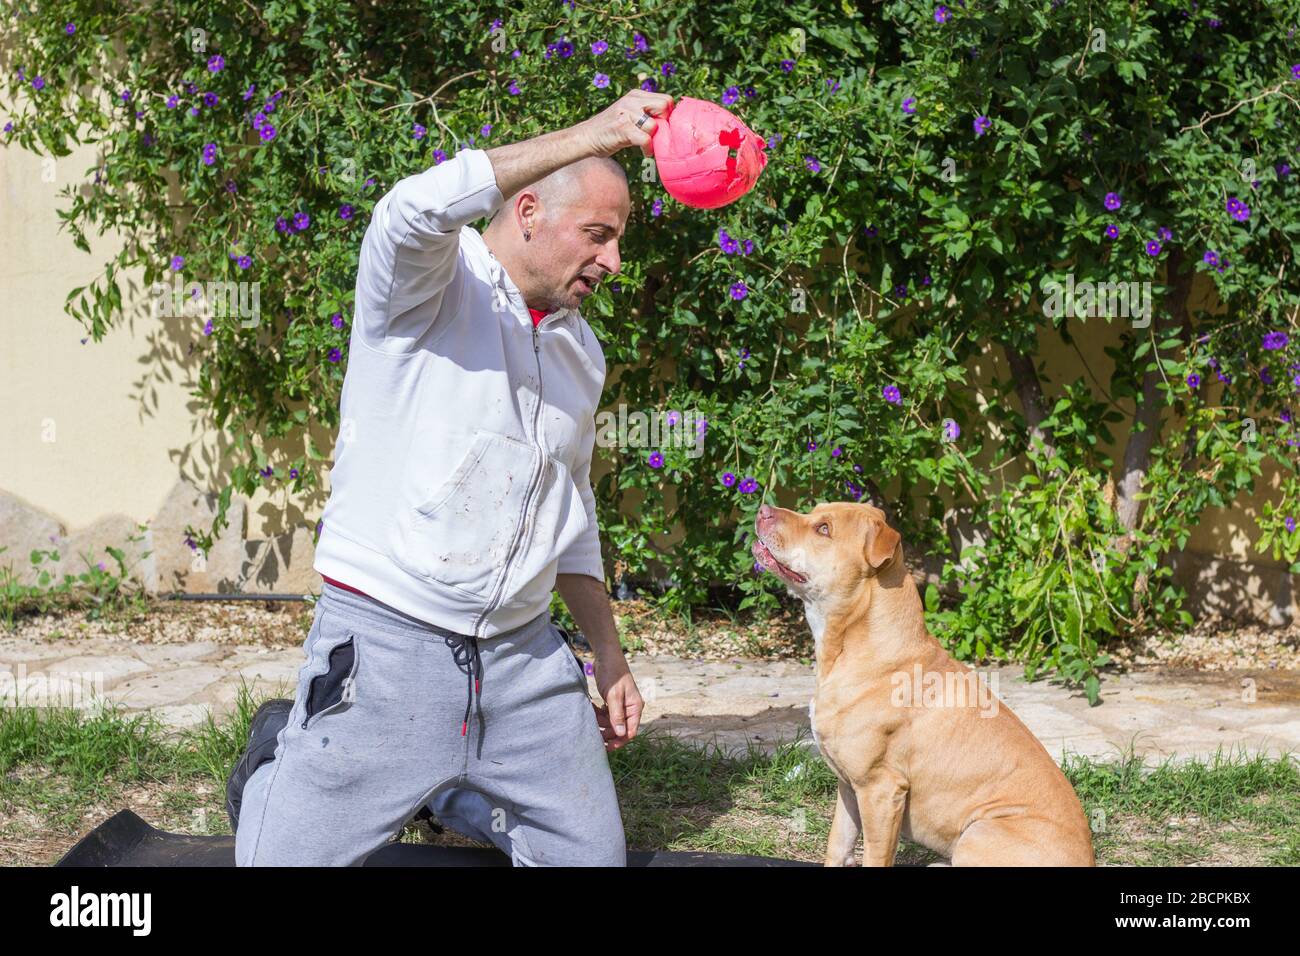 Man playing with dog outdoors in garden Stock Photo